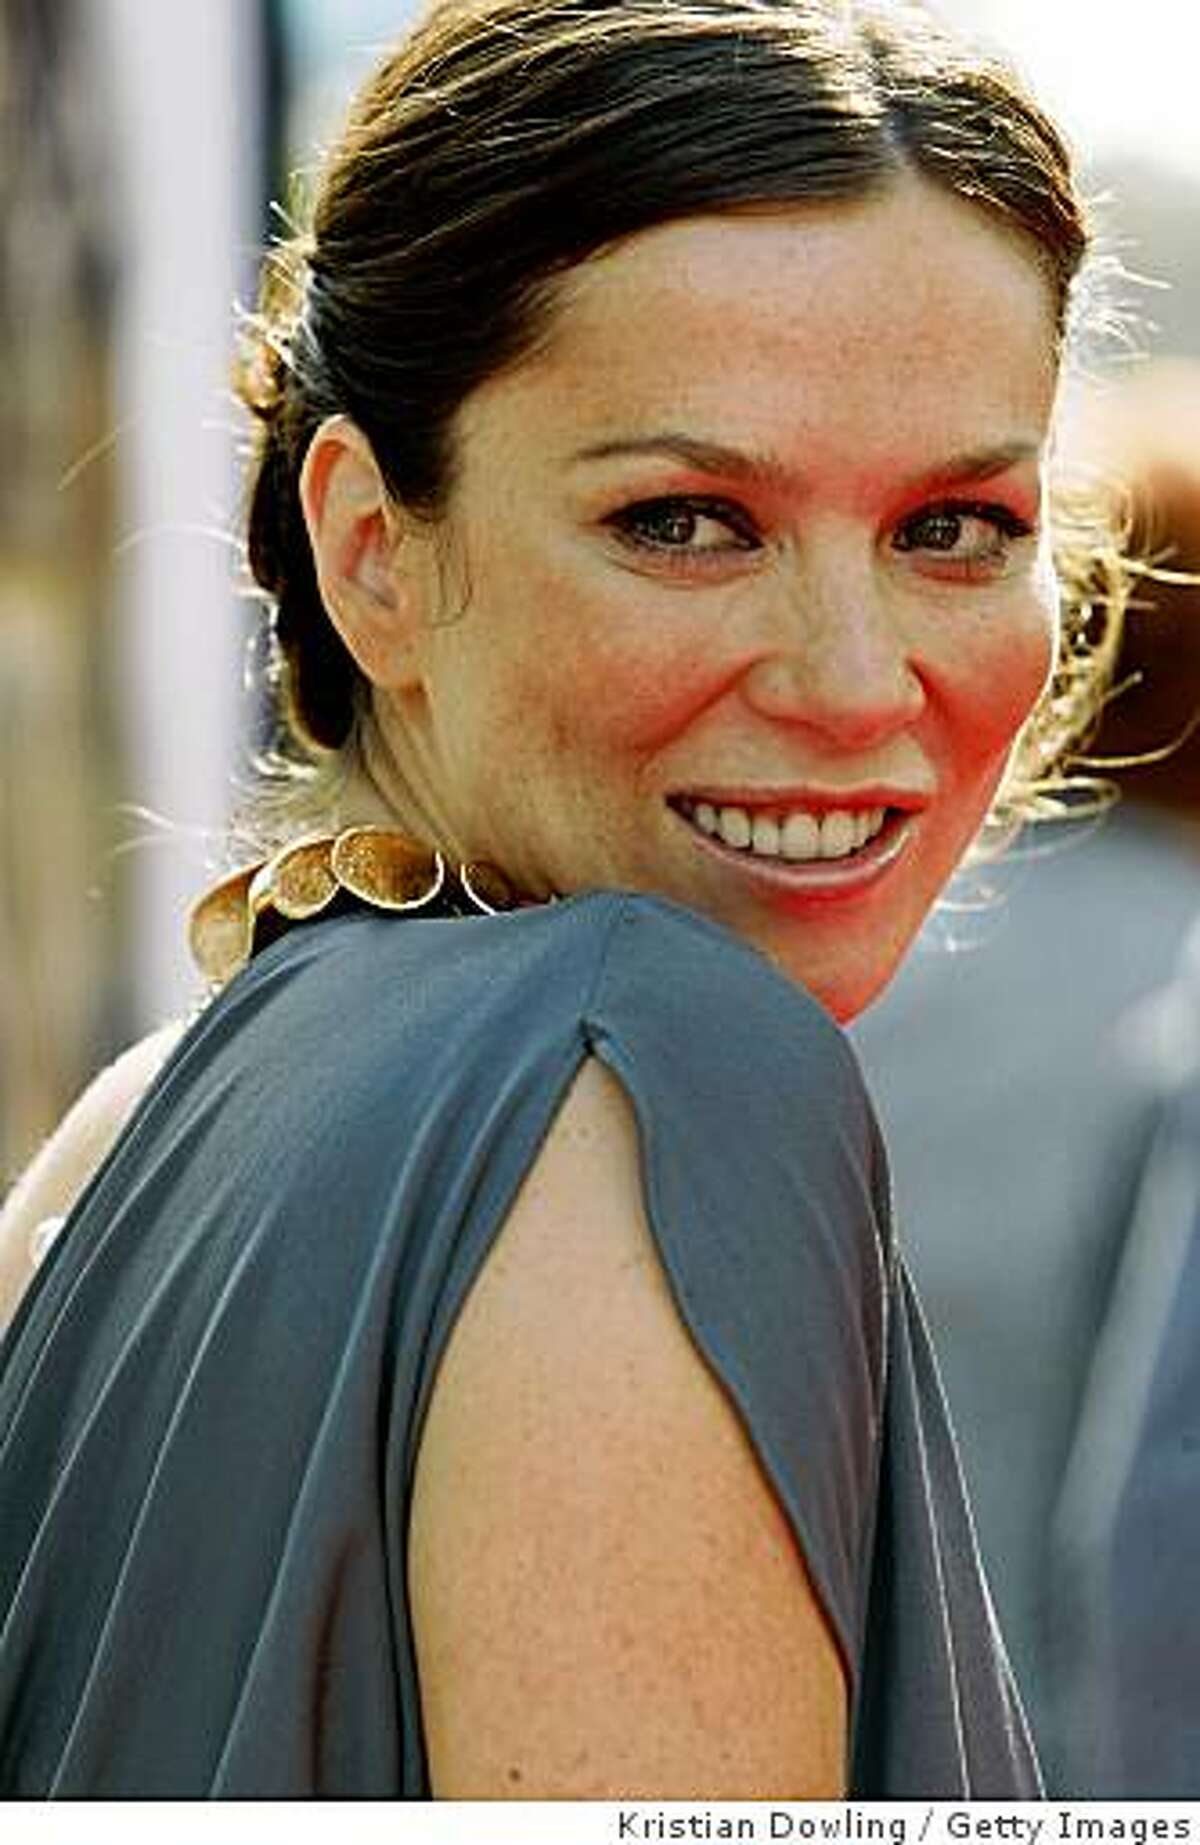 Actress Anna Friel arrives for the Premiere of Universal Pictures' "Land Of The Lost" at Grauman's Chinese Theater on May 30, 2009 in Hollywood, California.